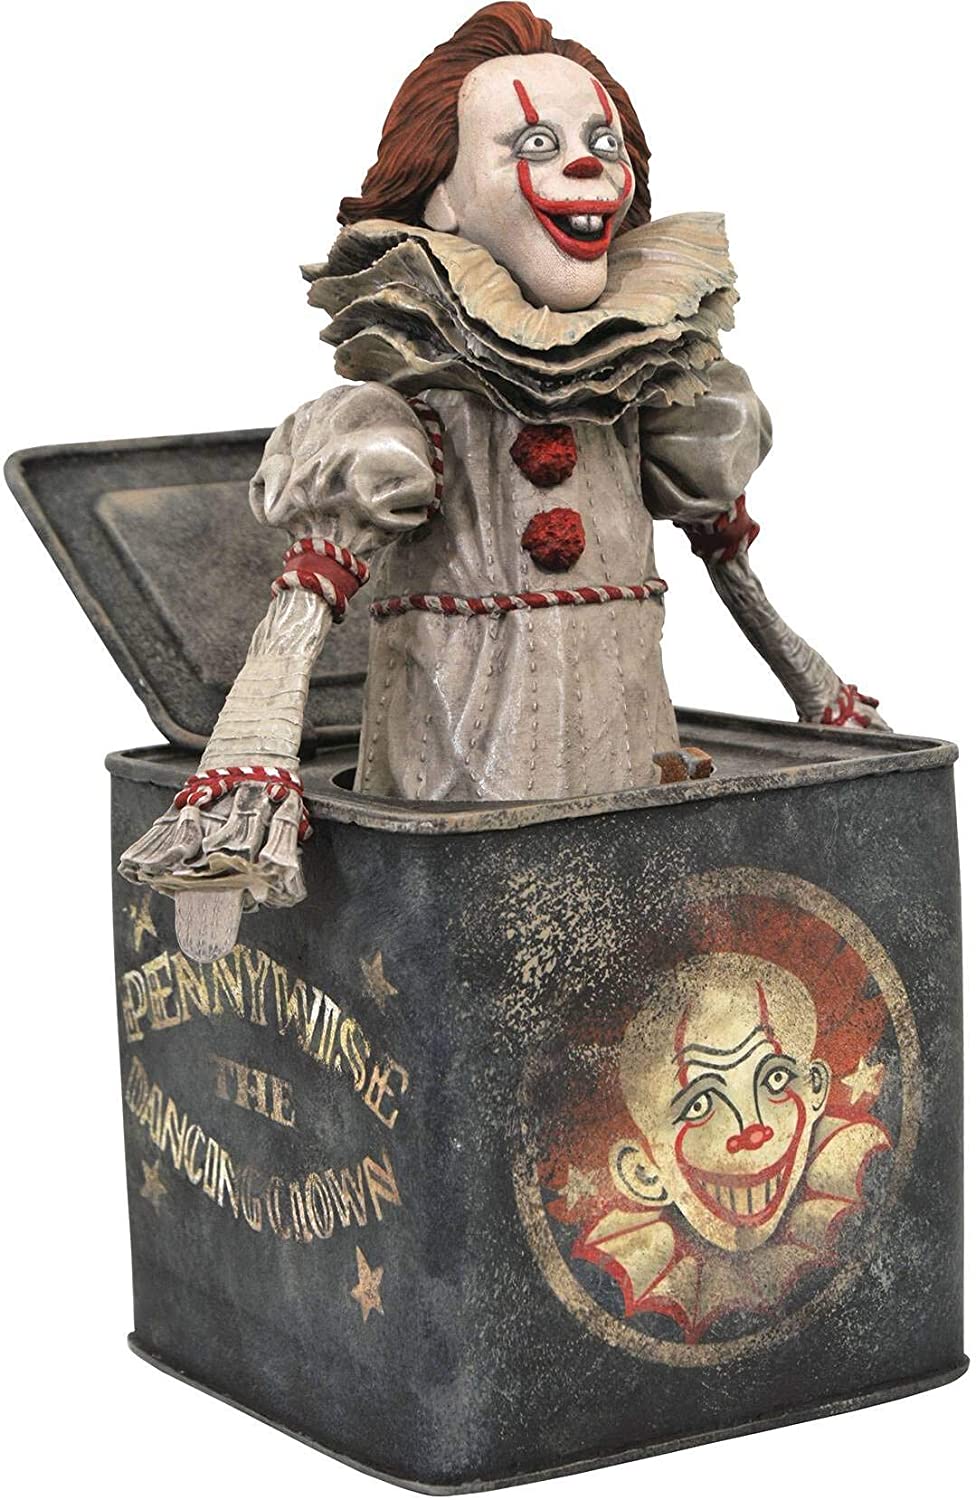 IT AUG202115 Kapitel Zwei Galerie: Pennywise in the Box PVC-STATUE, mehrfarbig